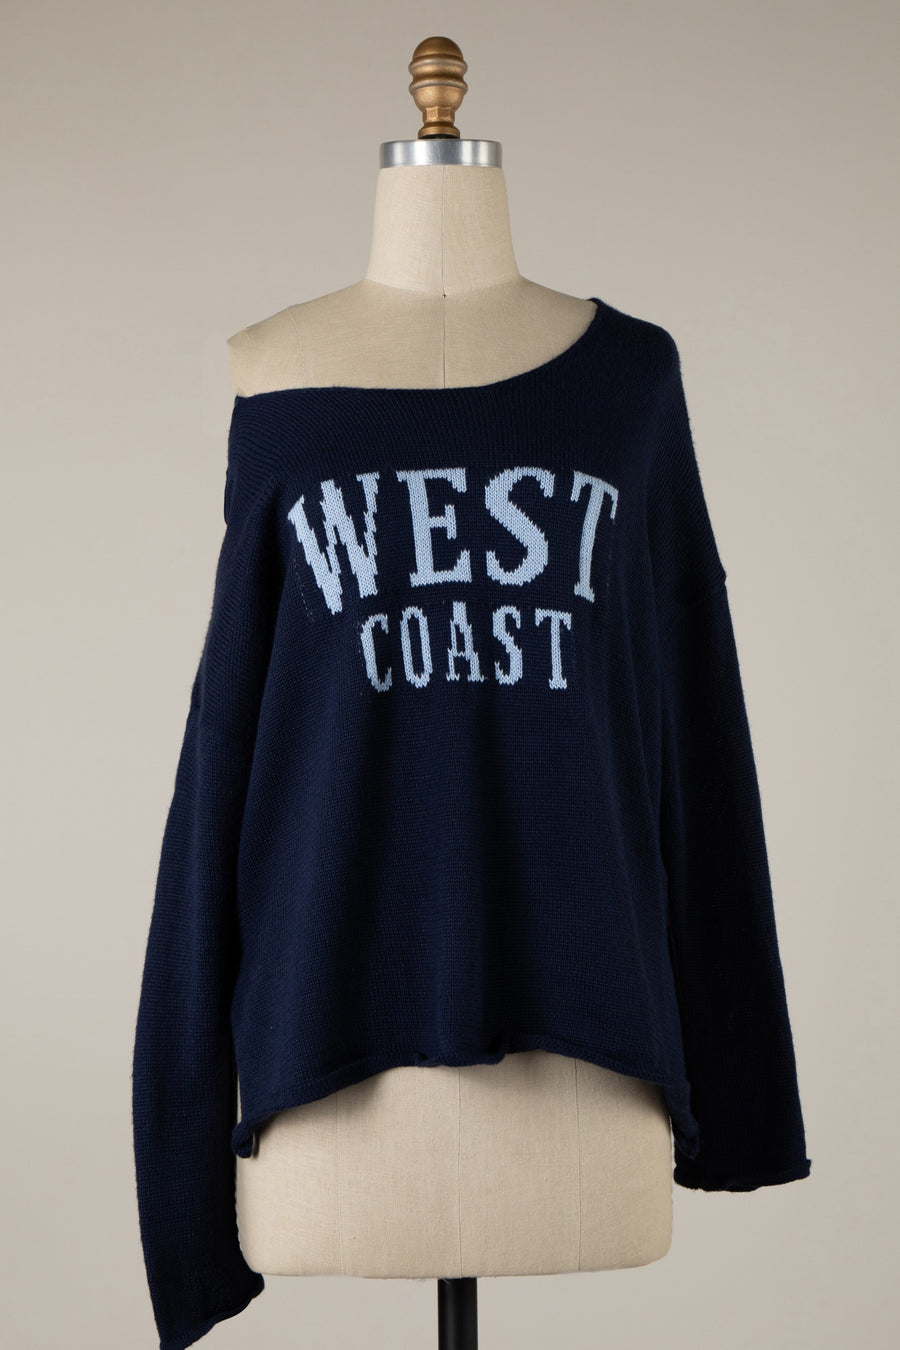 Featuring a light weight sweater with "West Coast" on the frontand a wide neckline.